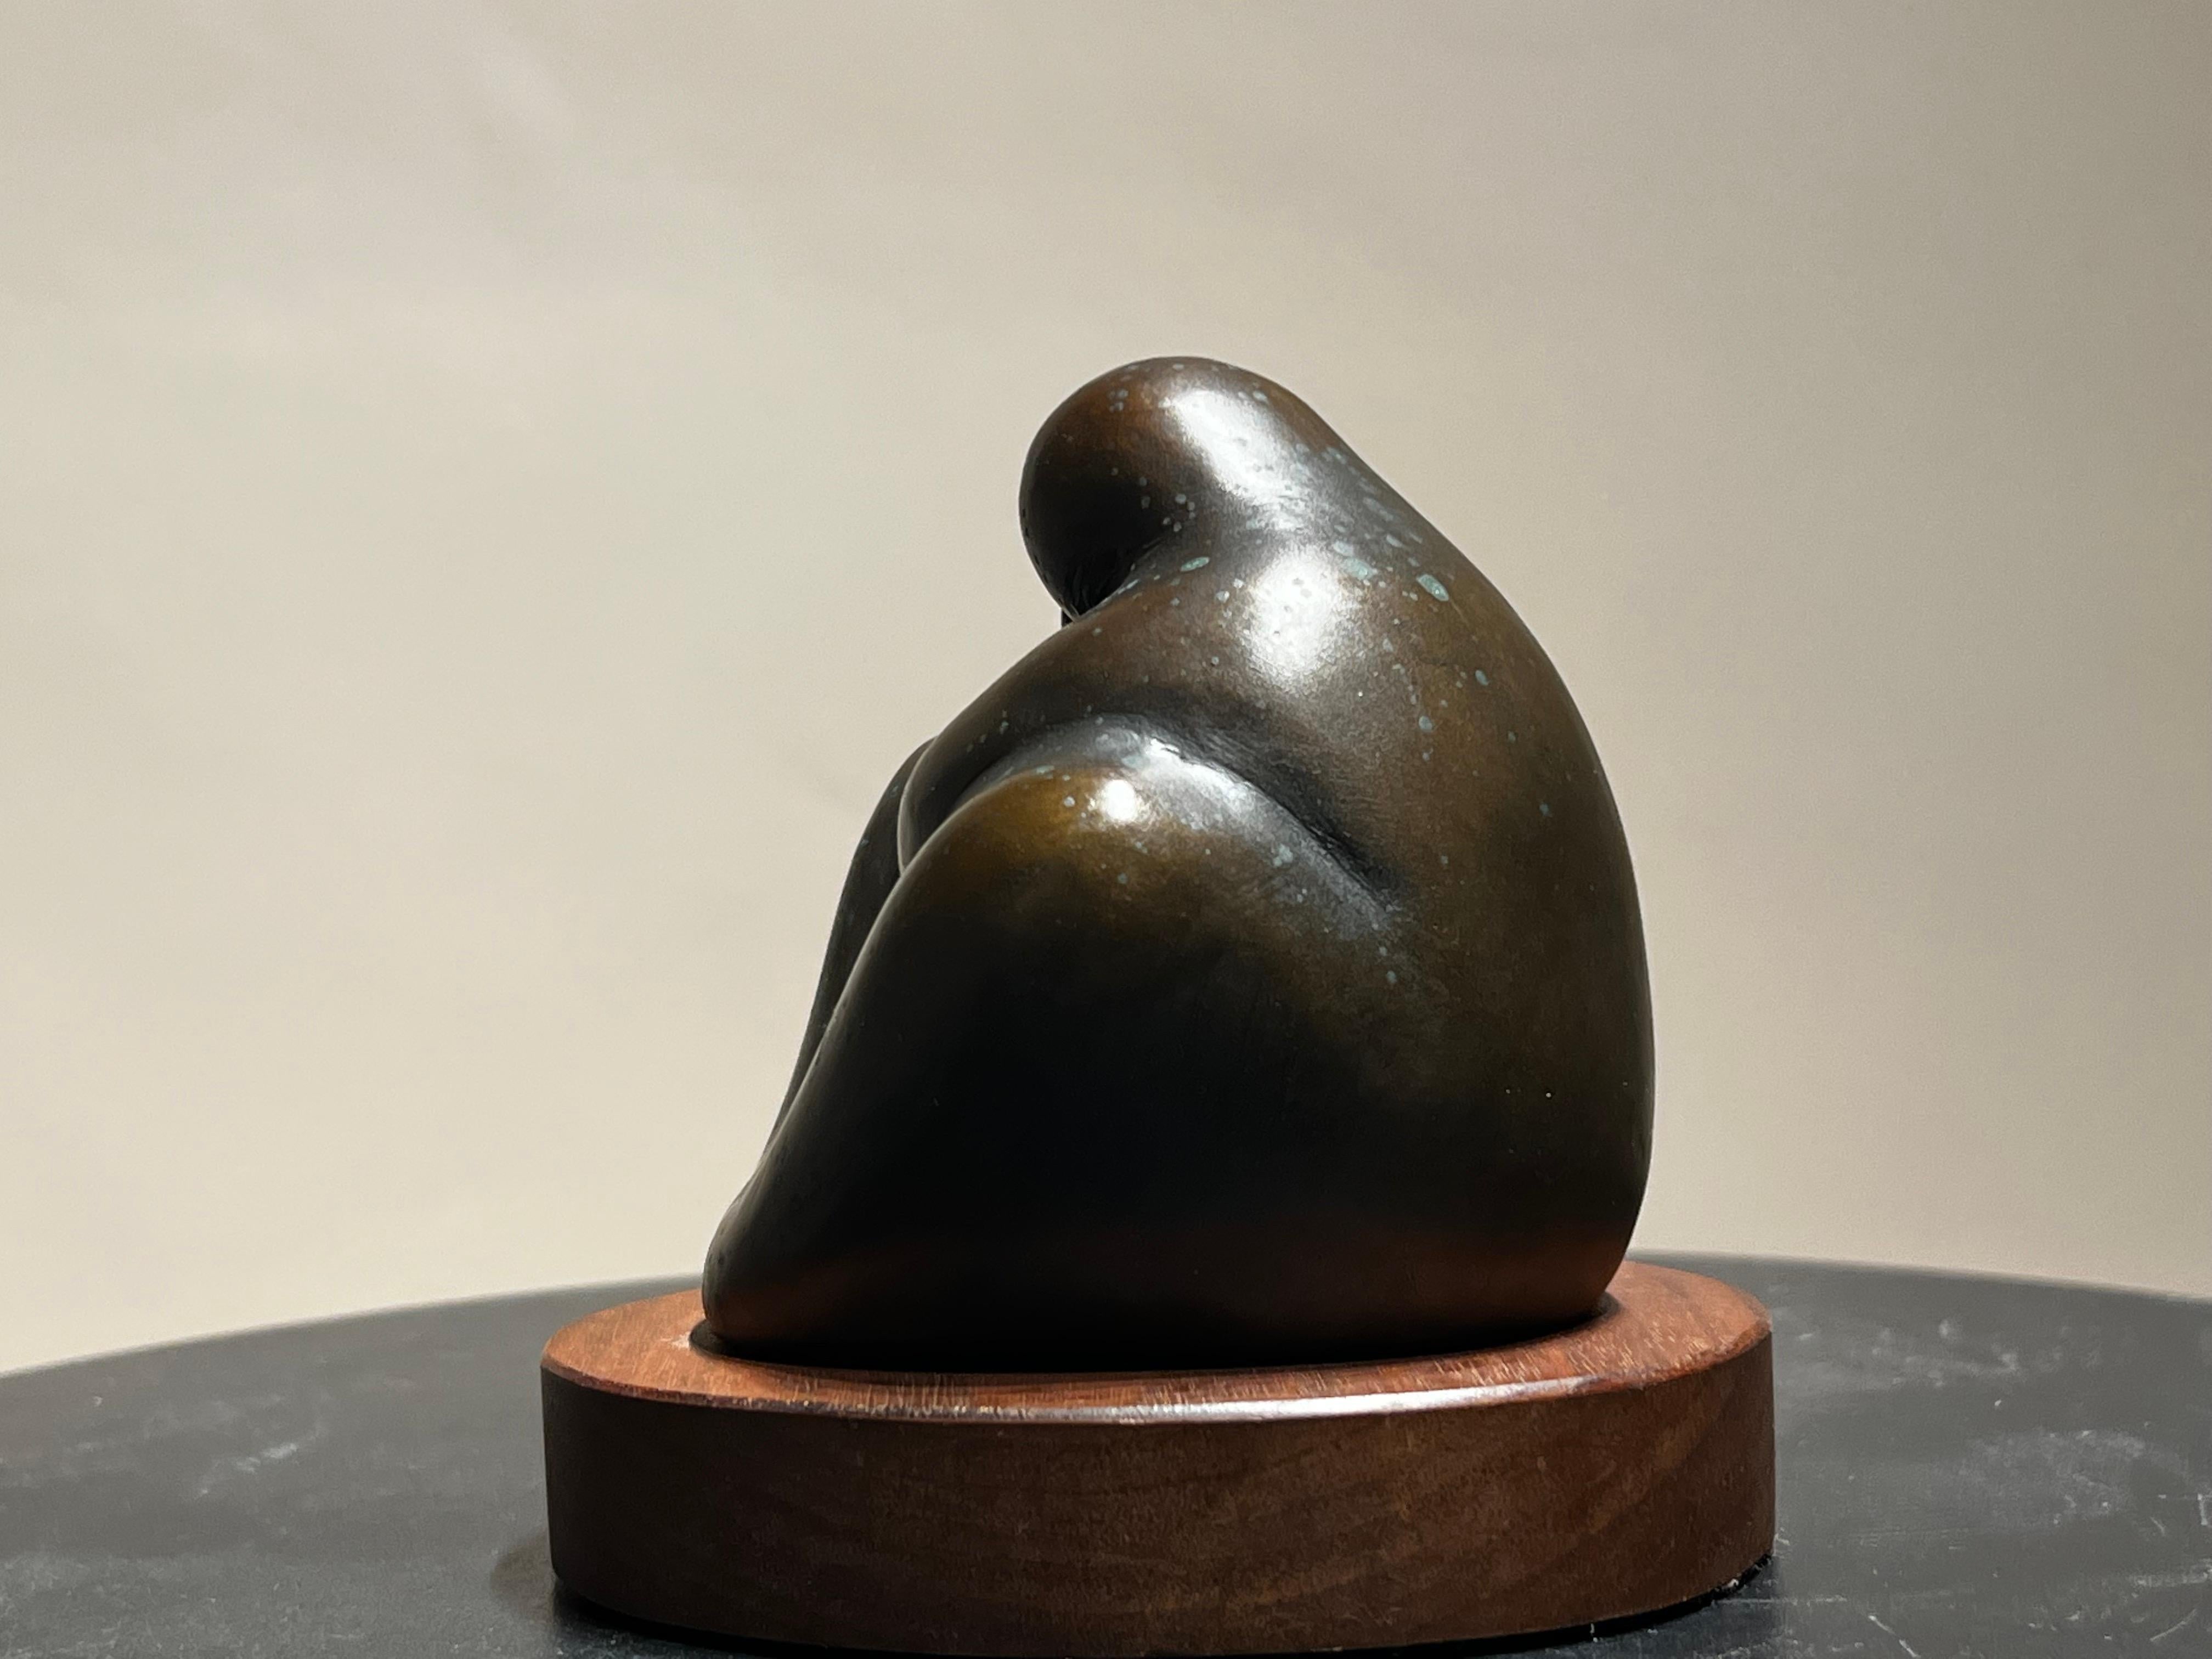 Motherhood sculpture by Allan Houser, mother, child, abstract, bronze, small 
limited edition
small nick in wood base